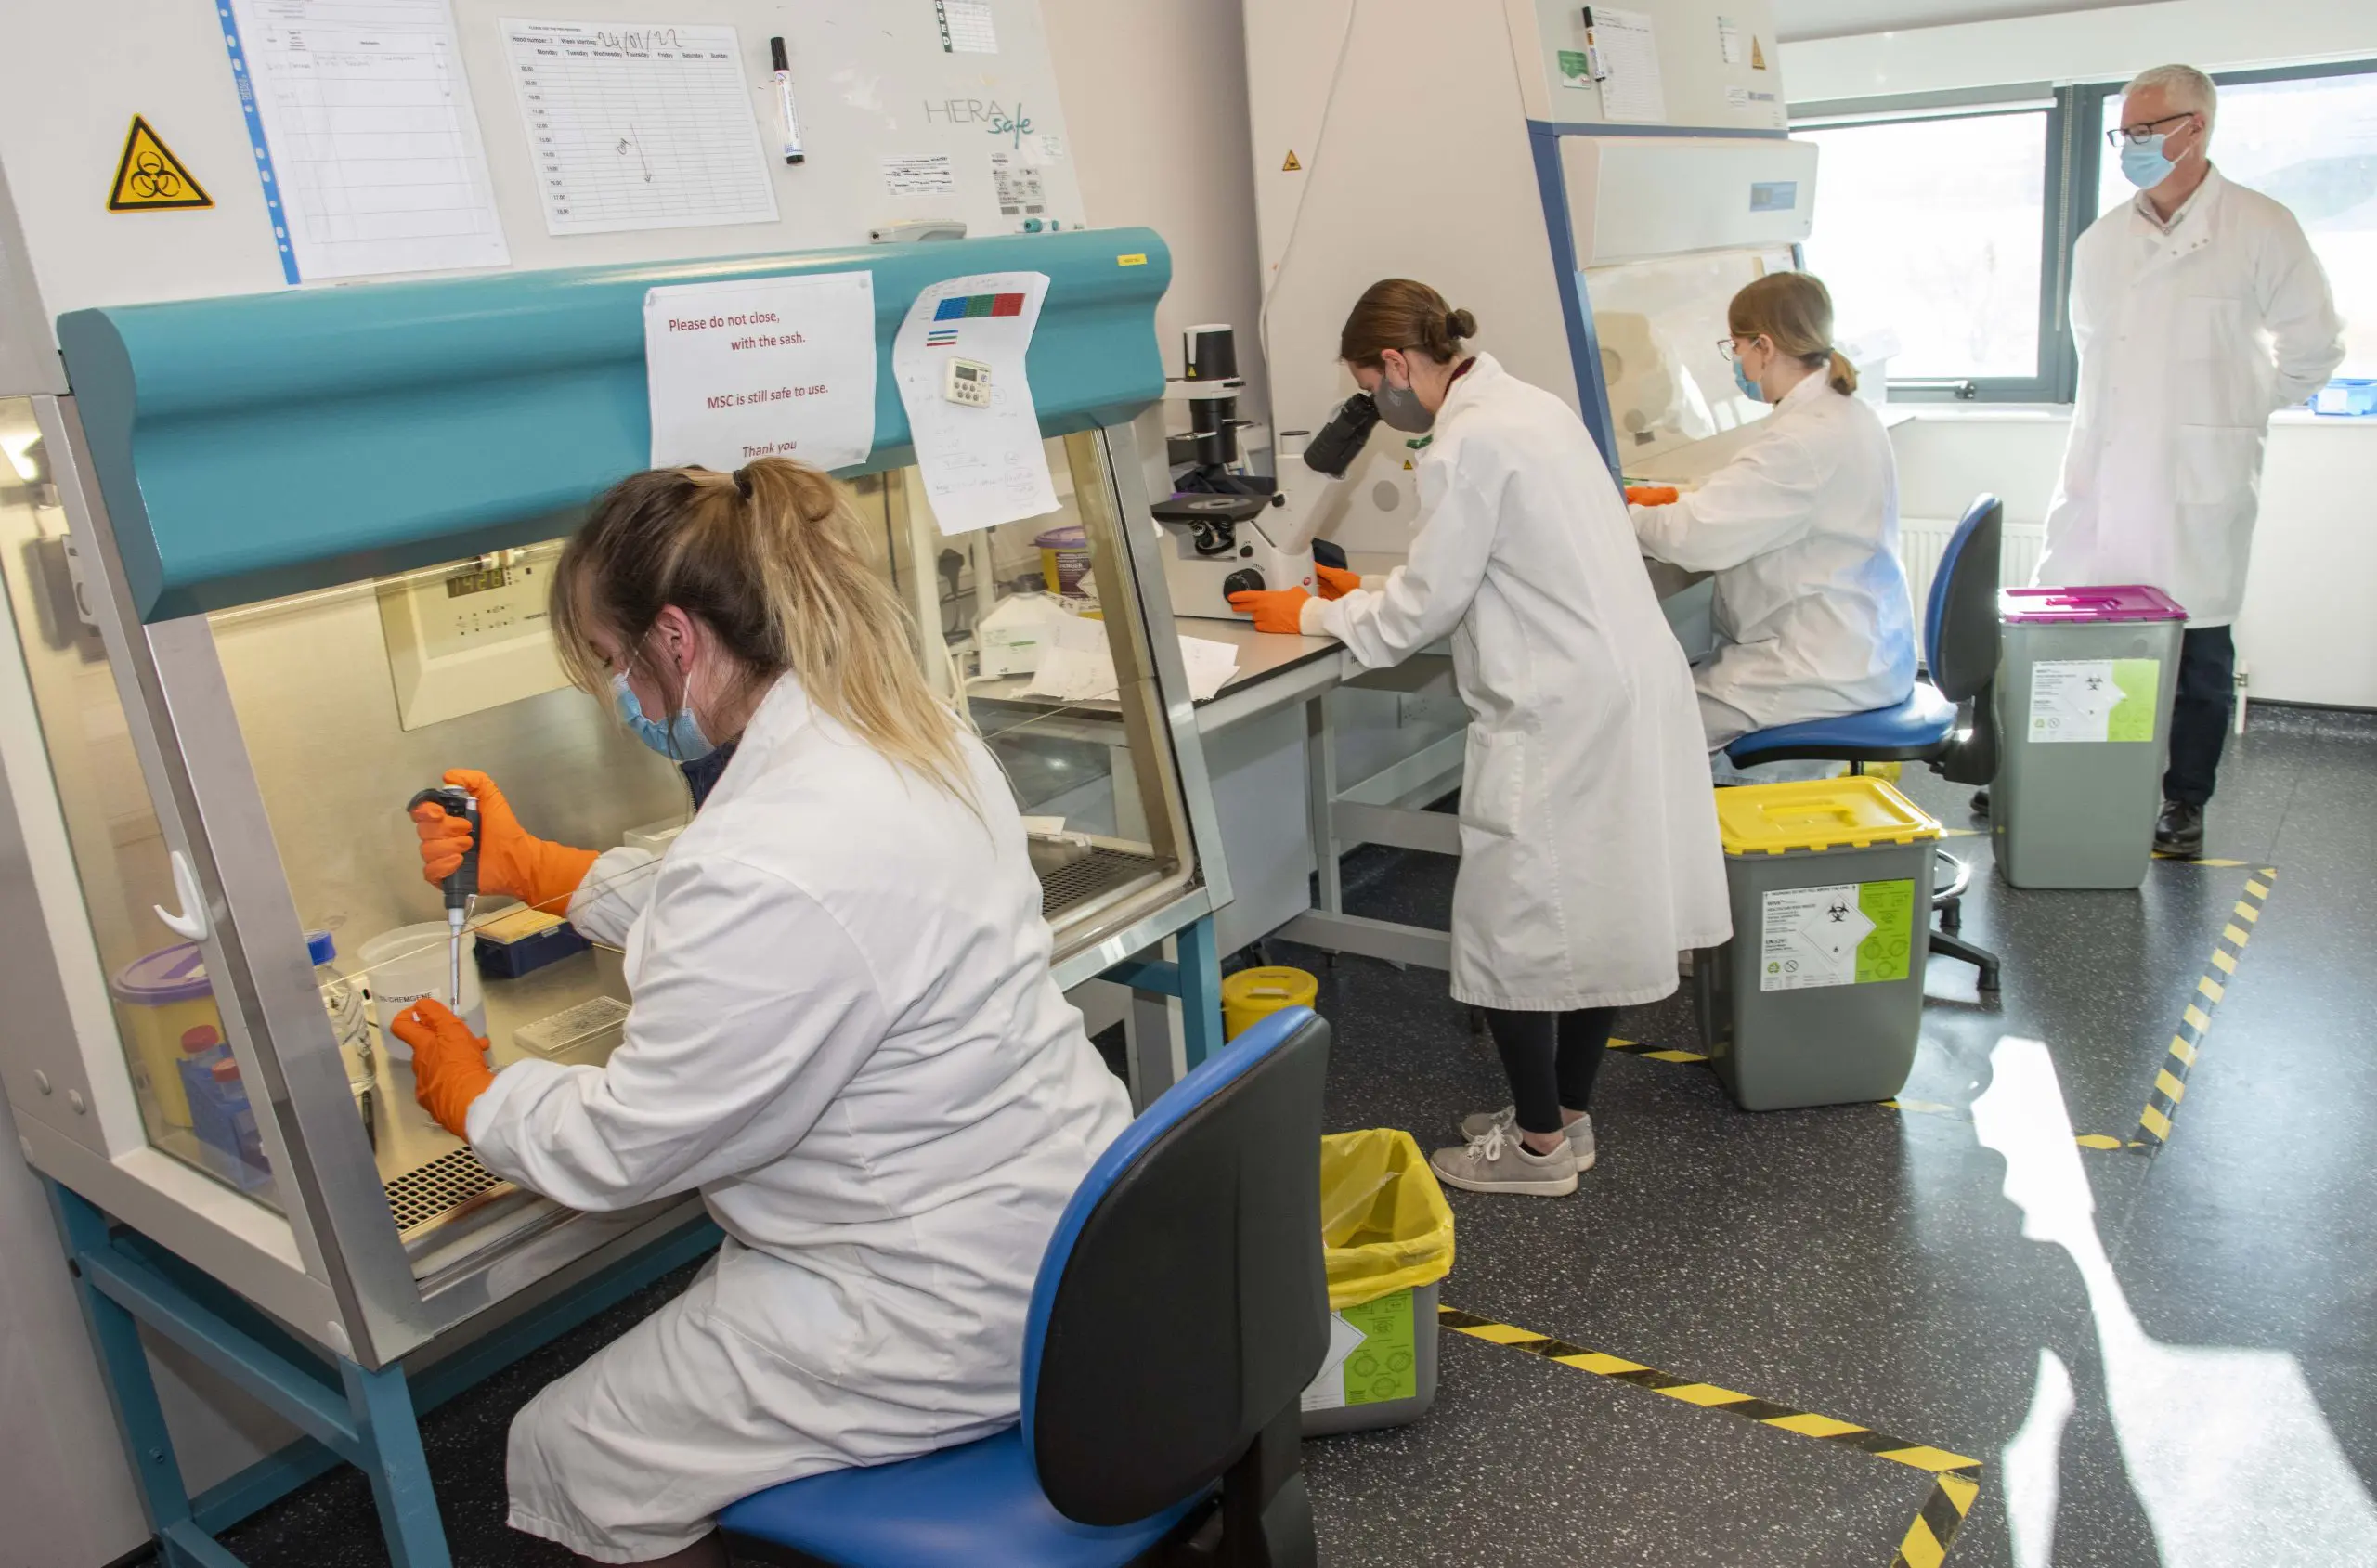 The University of Surrey has been trialling the new clinical waste containers in its laboratories.